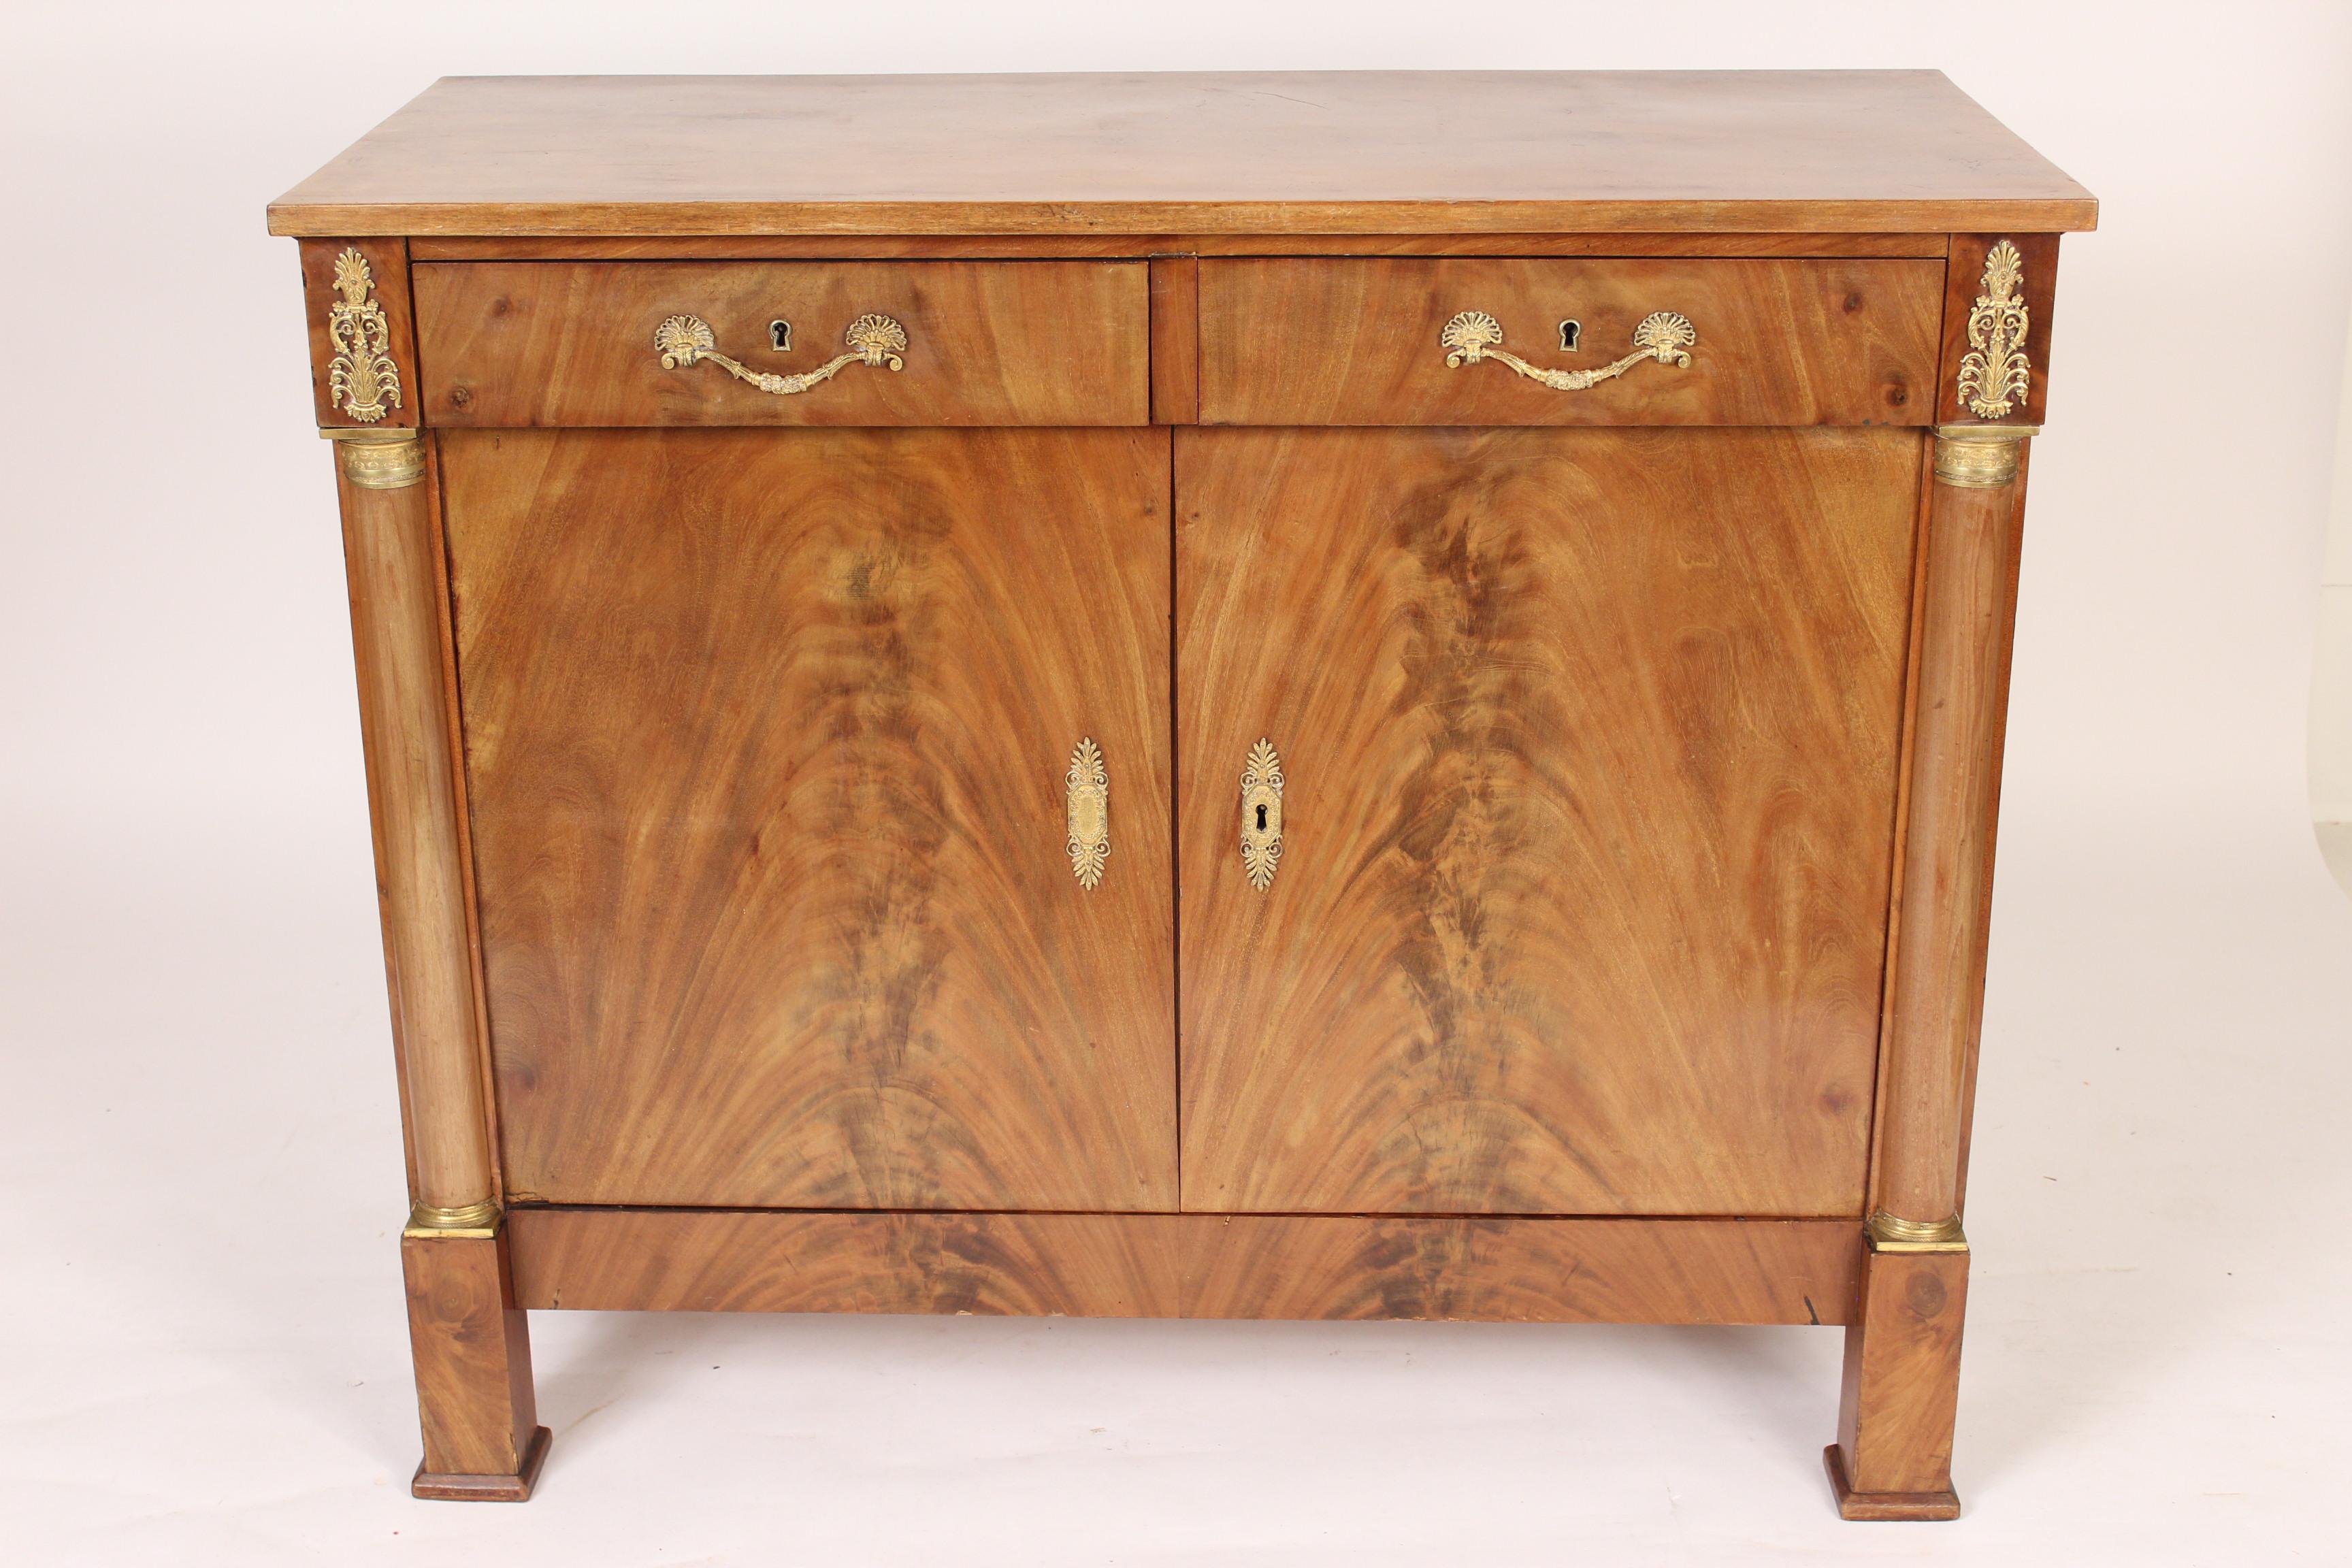 Antique Empire style mahogany buffet, late 19th century. With flame mahogany doors, gilt bronze hardware and hand dove tailed drawer construction.